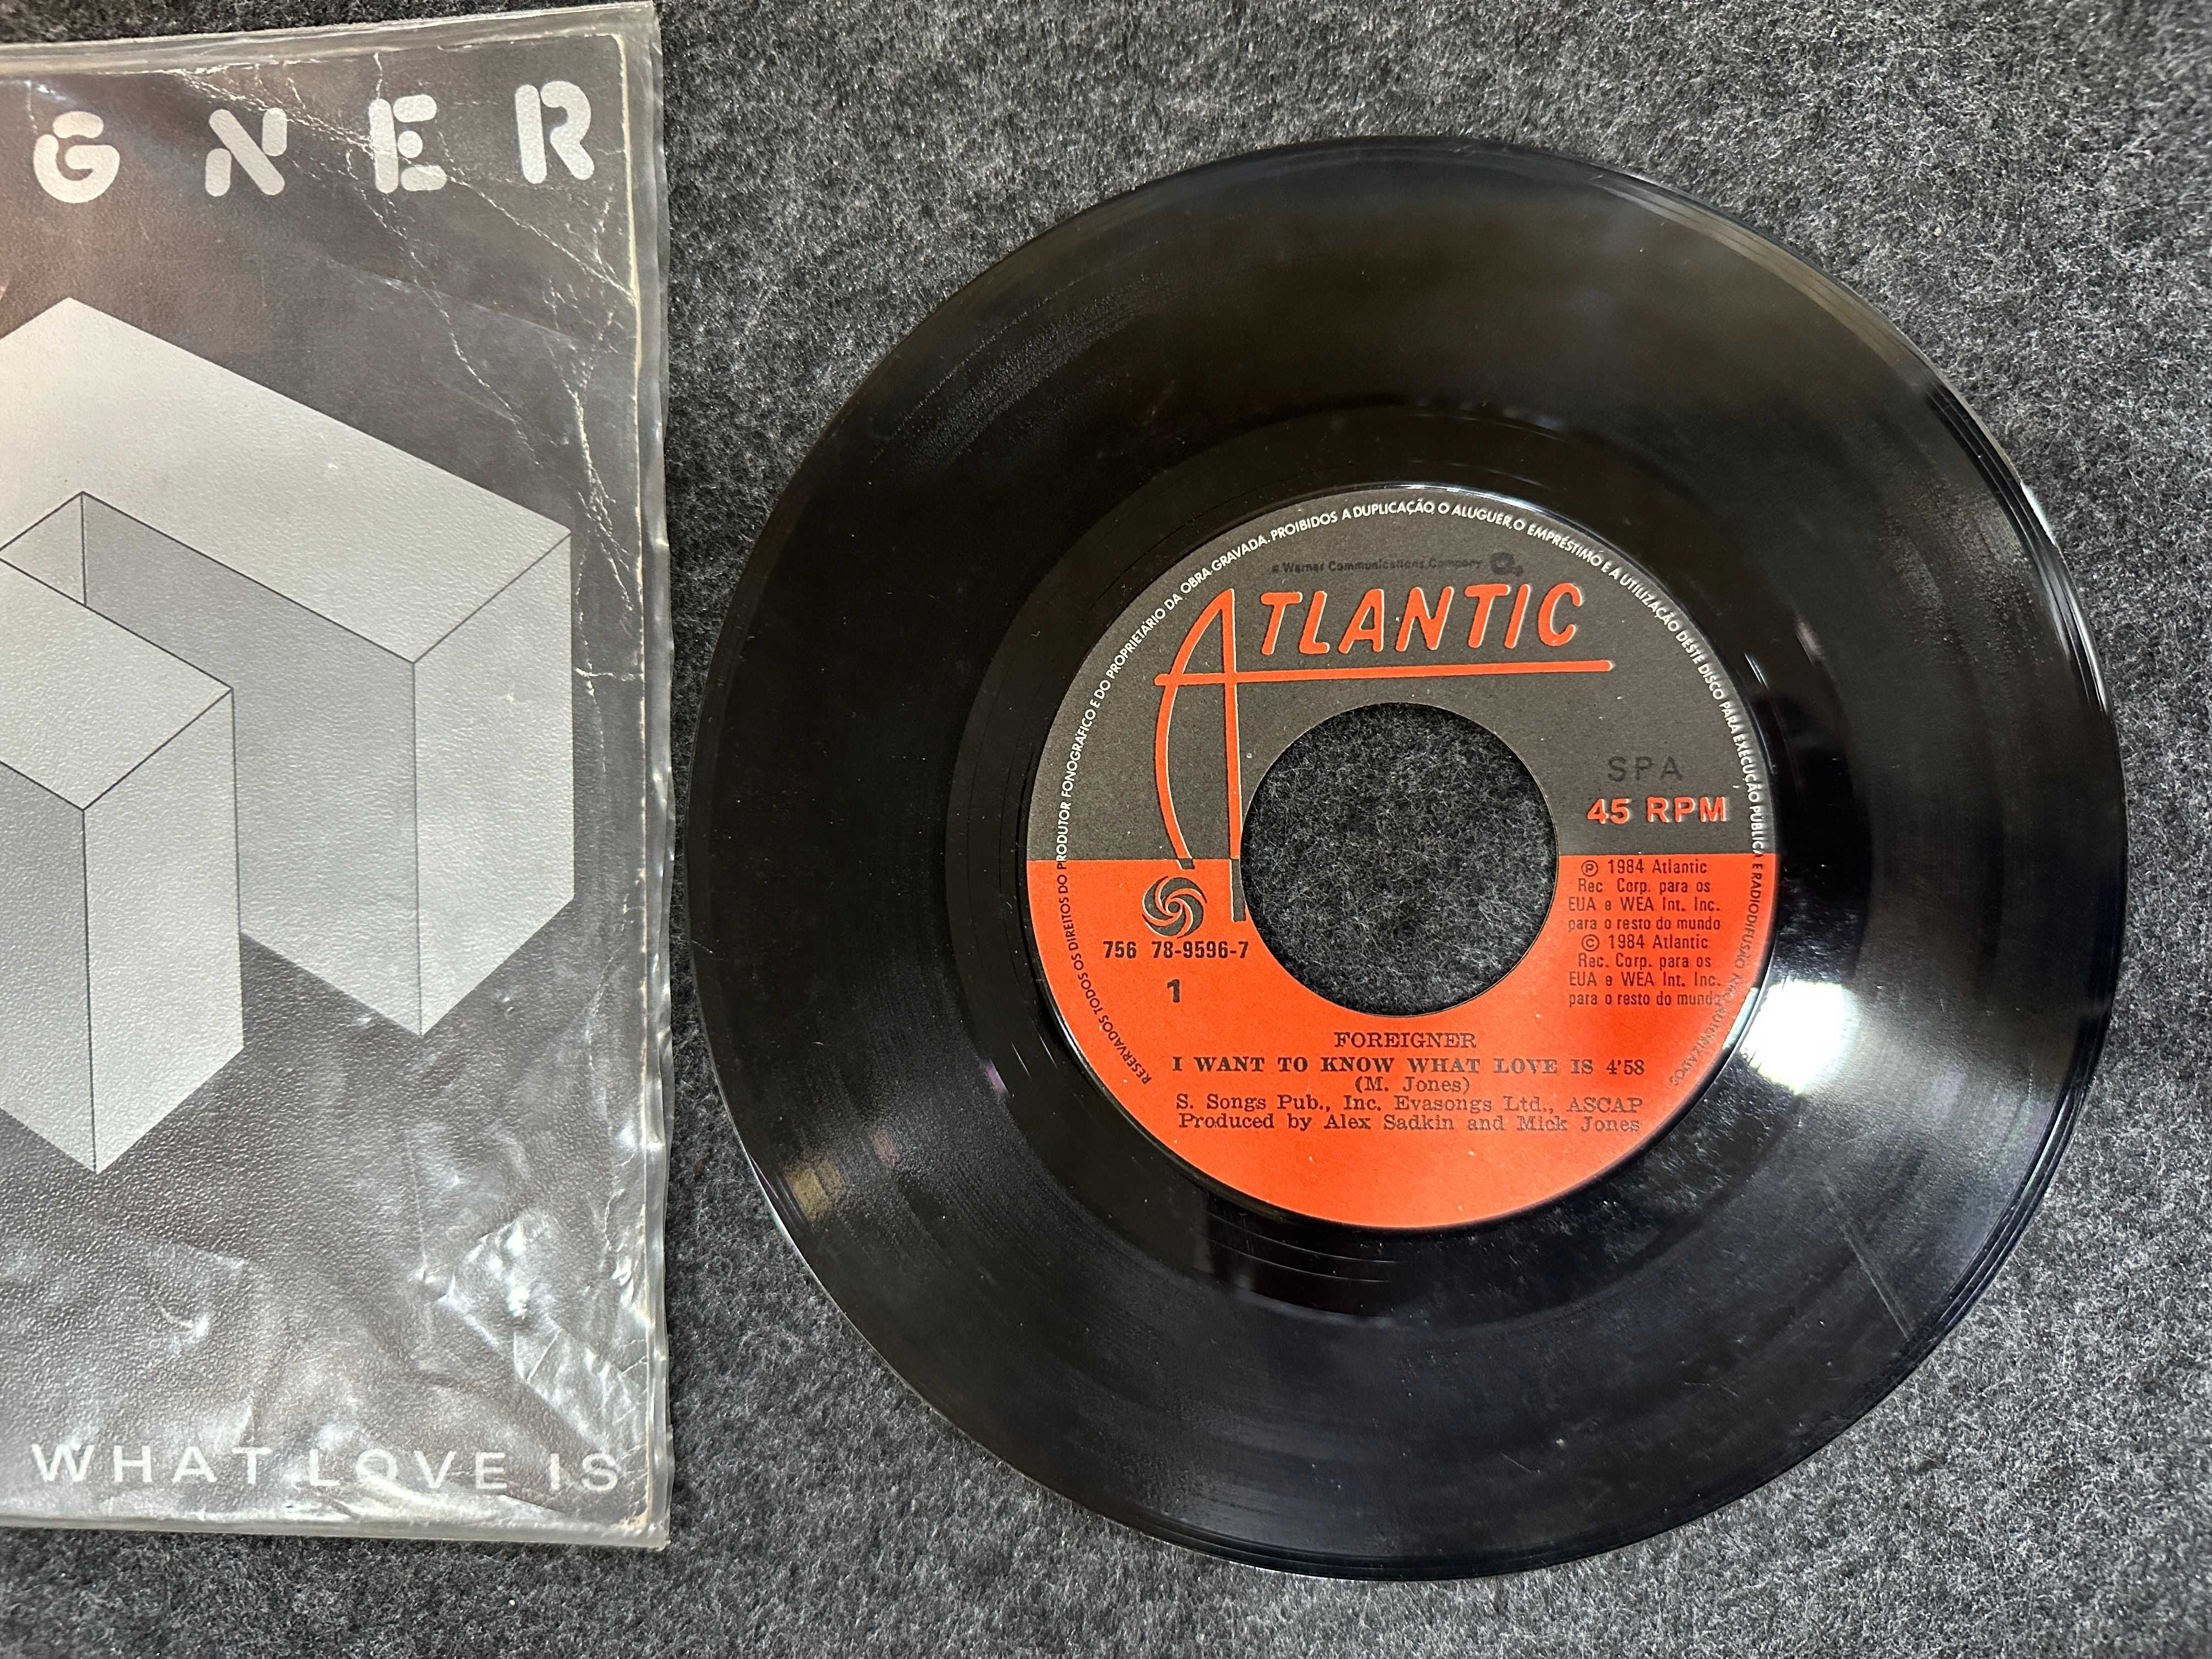 Foreigner I Want To Know What Love Is / Street Thunder 45 RPM - Vinyl